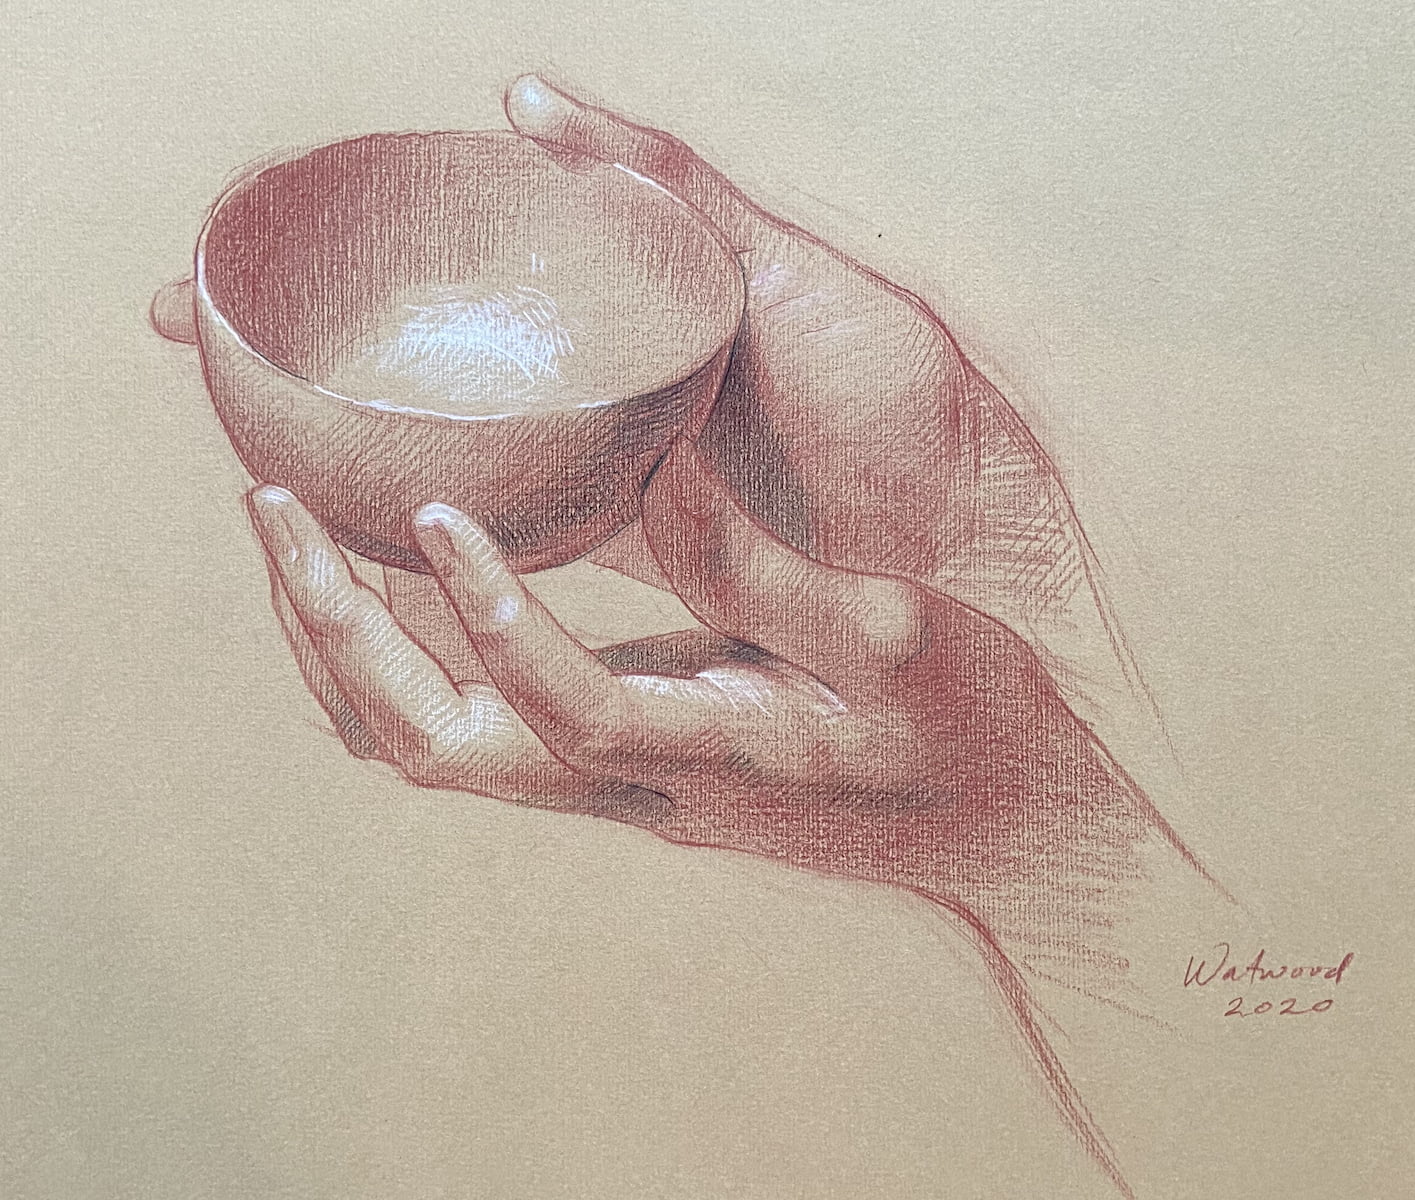 Patricia Watwood, a life drawing of hands holding a bowl